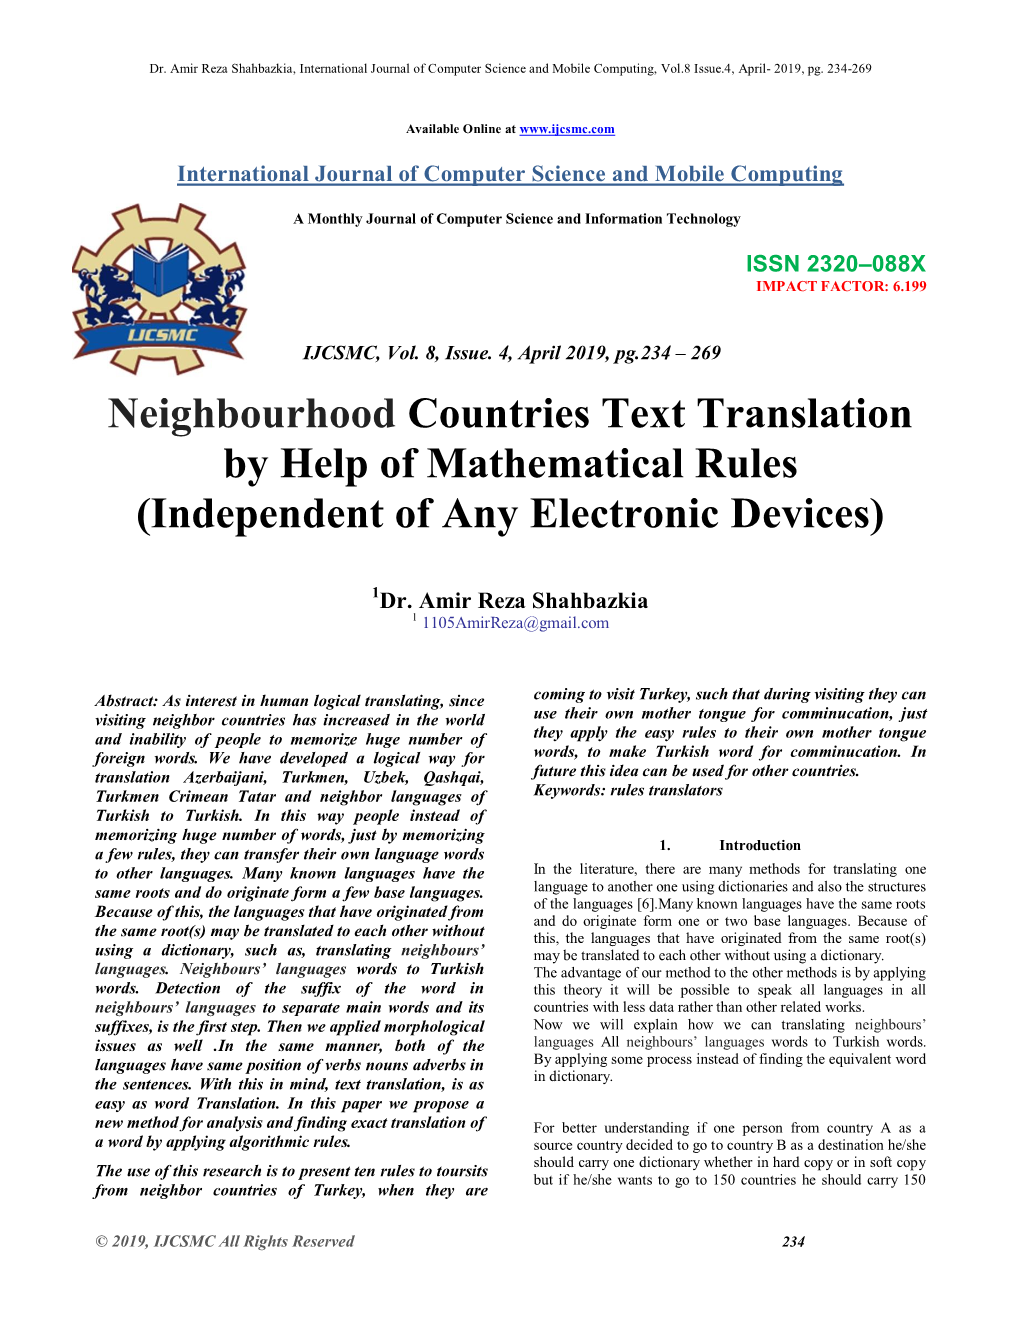 Neighbourhood Countries Text Translation by Help of Mathematical Rules (Independent of Any Electronic Devices)